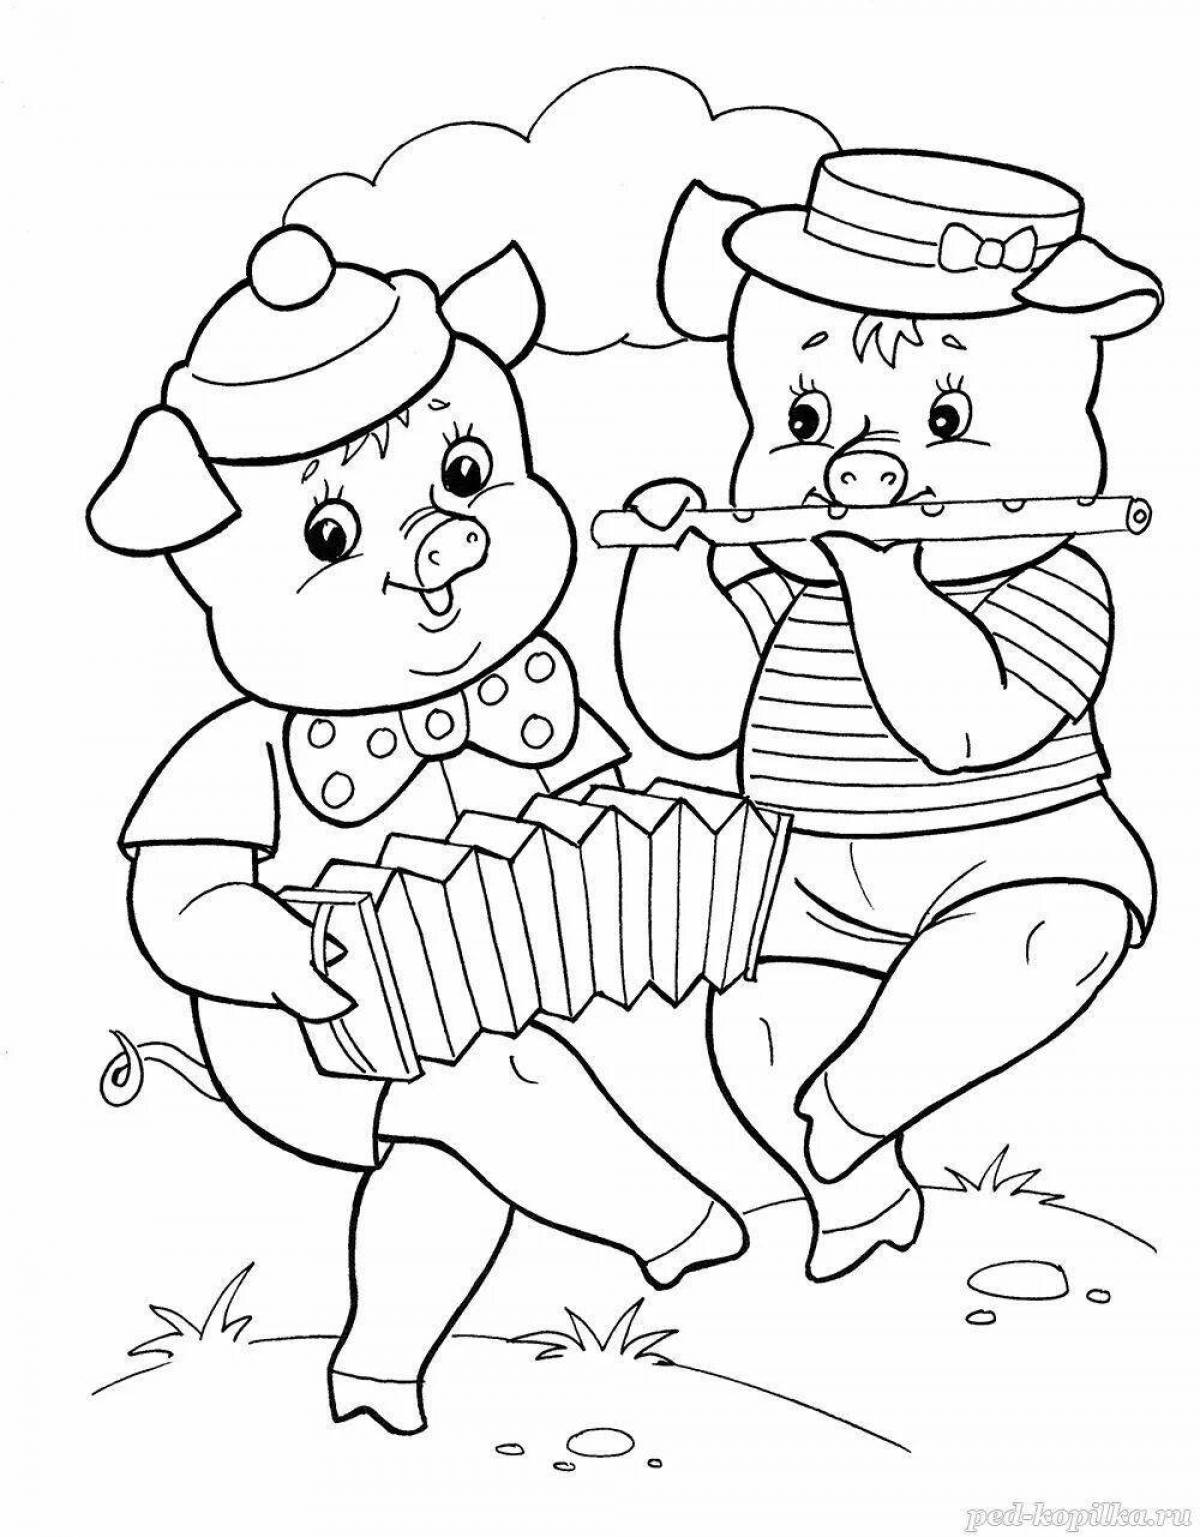 Outstanding coloring page of the tale of the three little pigs